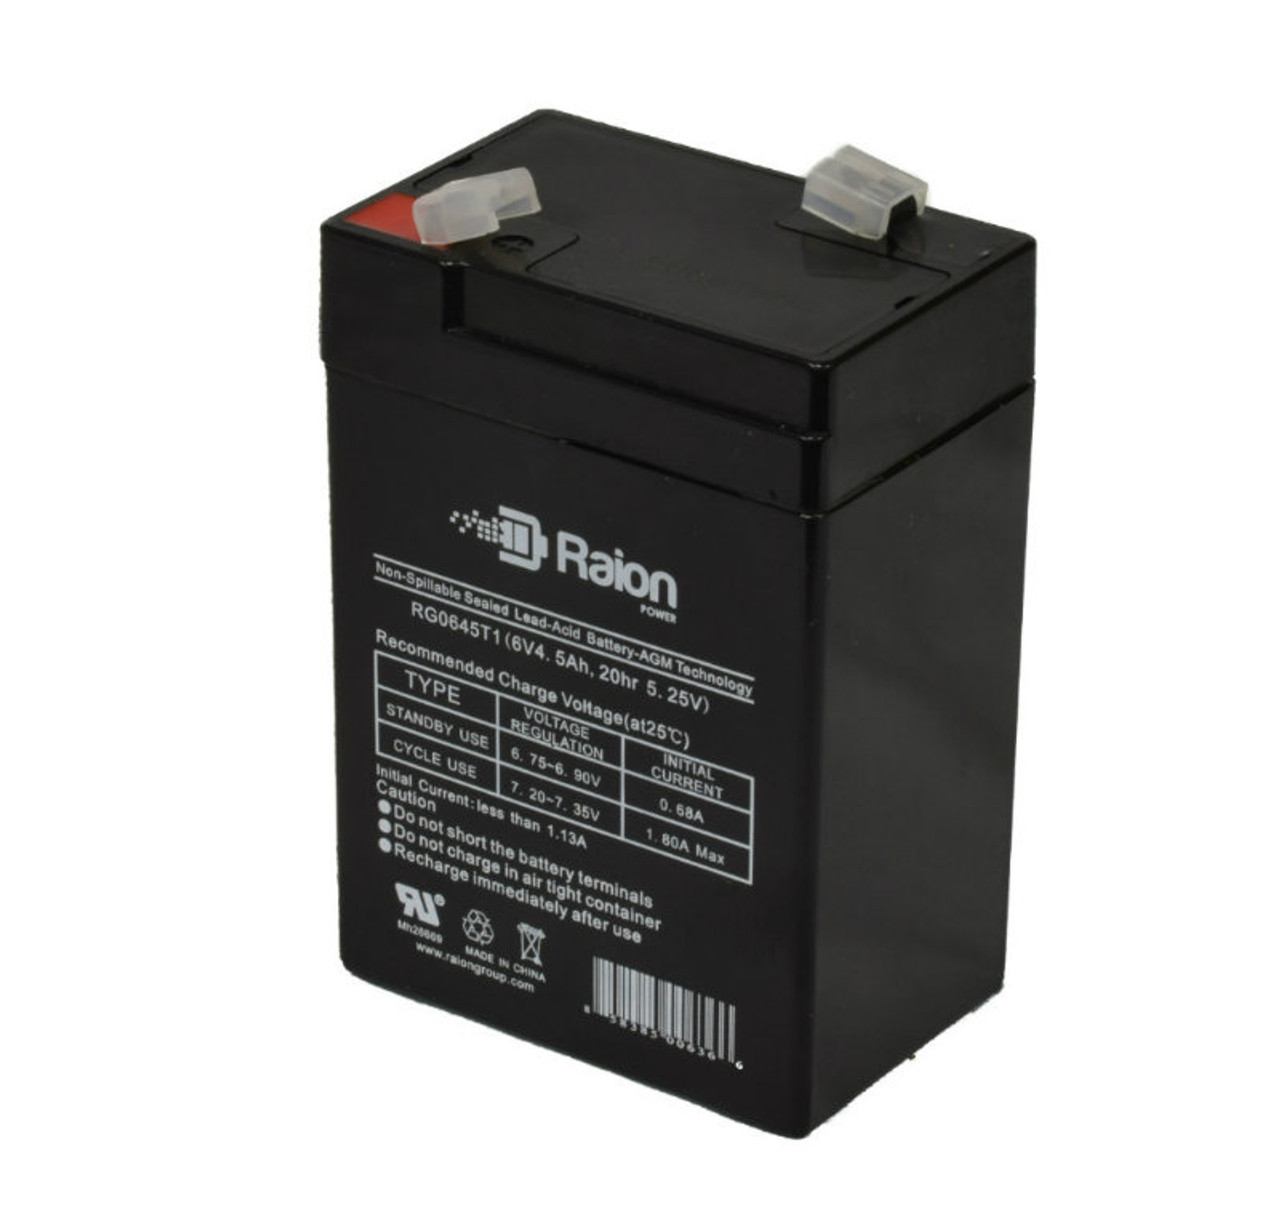 Raion Power RG0645T1 6V 4.5Ah Replacement Battery Cartridge for Light Alarms CA